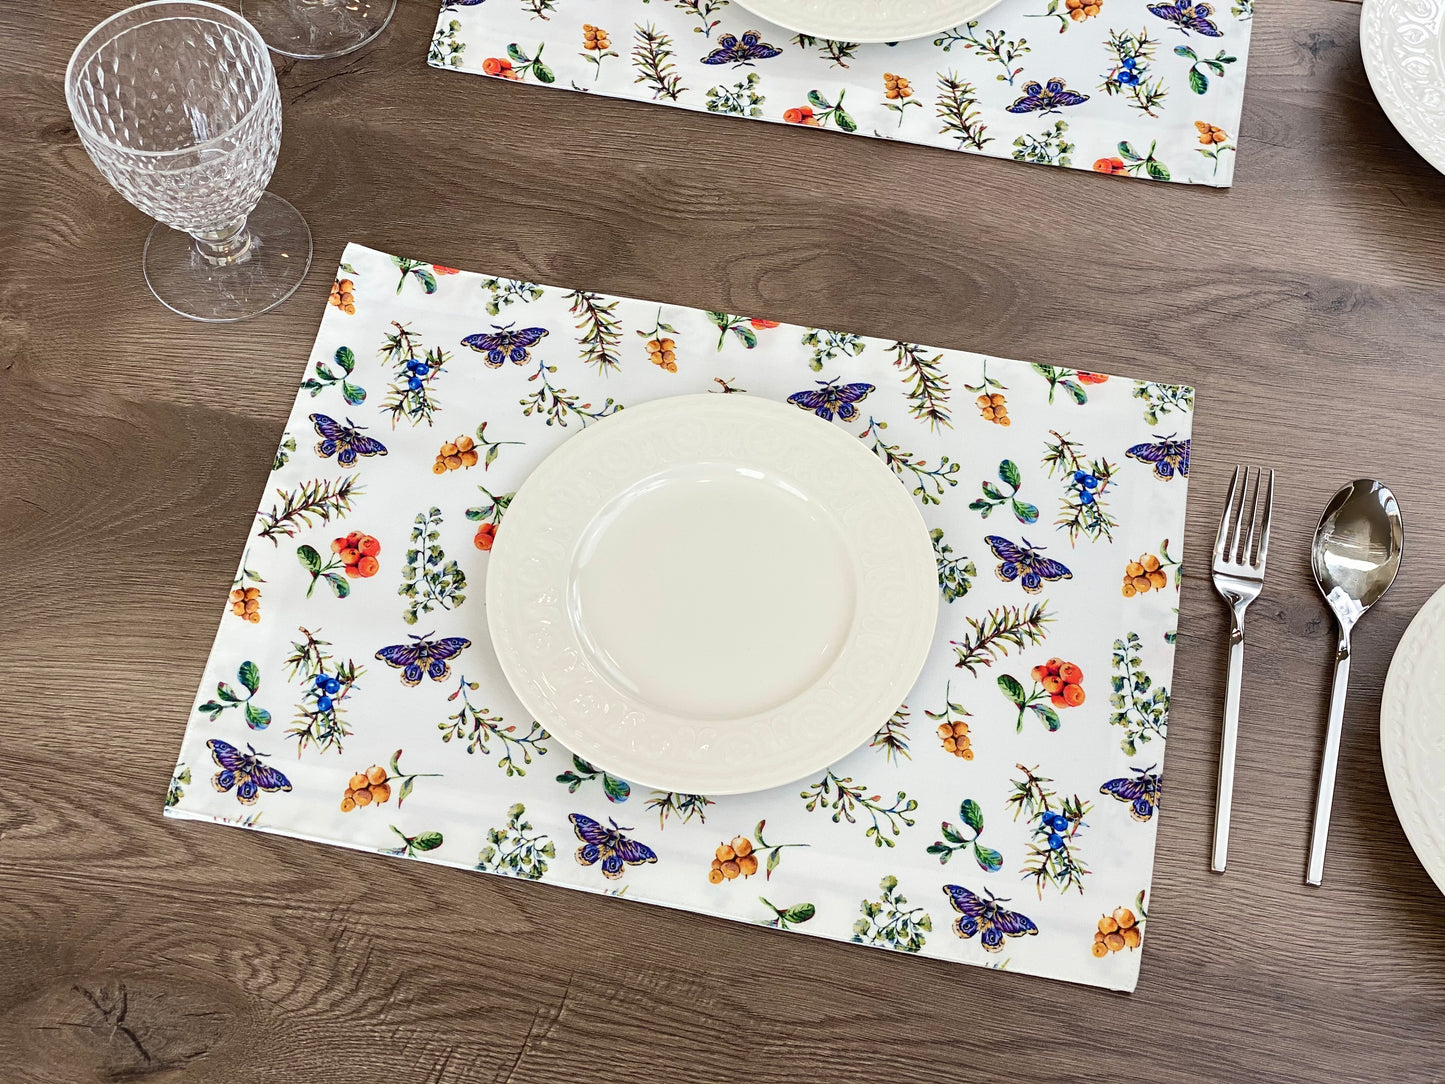 Set of 4 floral forest Placemat, butterflies with fir branches, berries and fern pattern, Washable Cotton Placemat for fall dining table